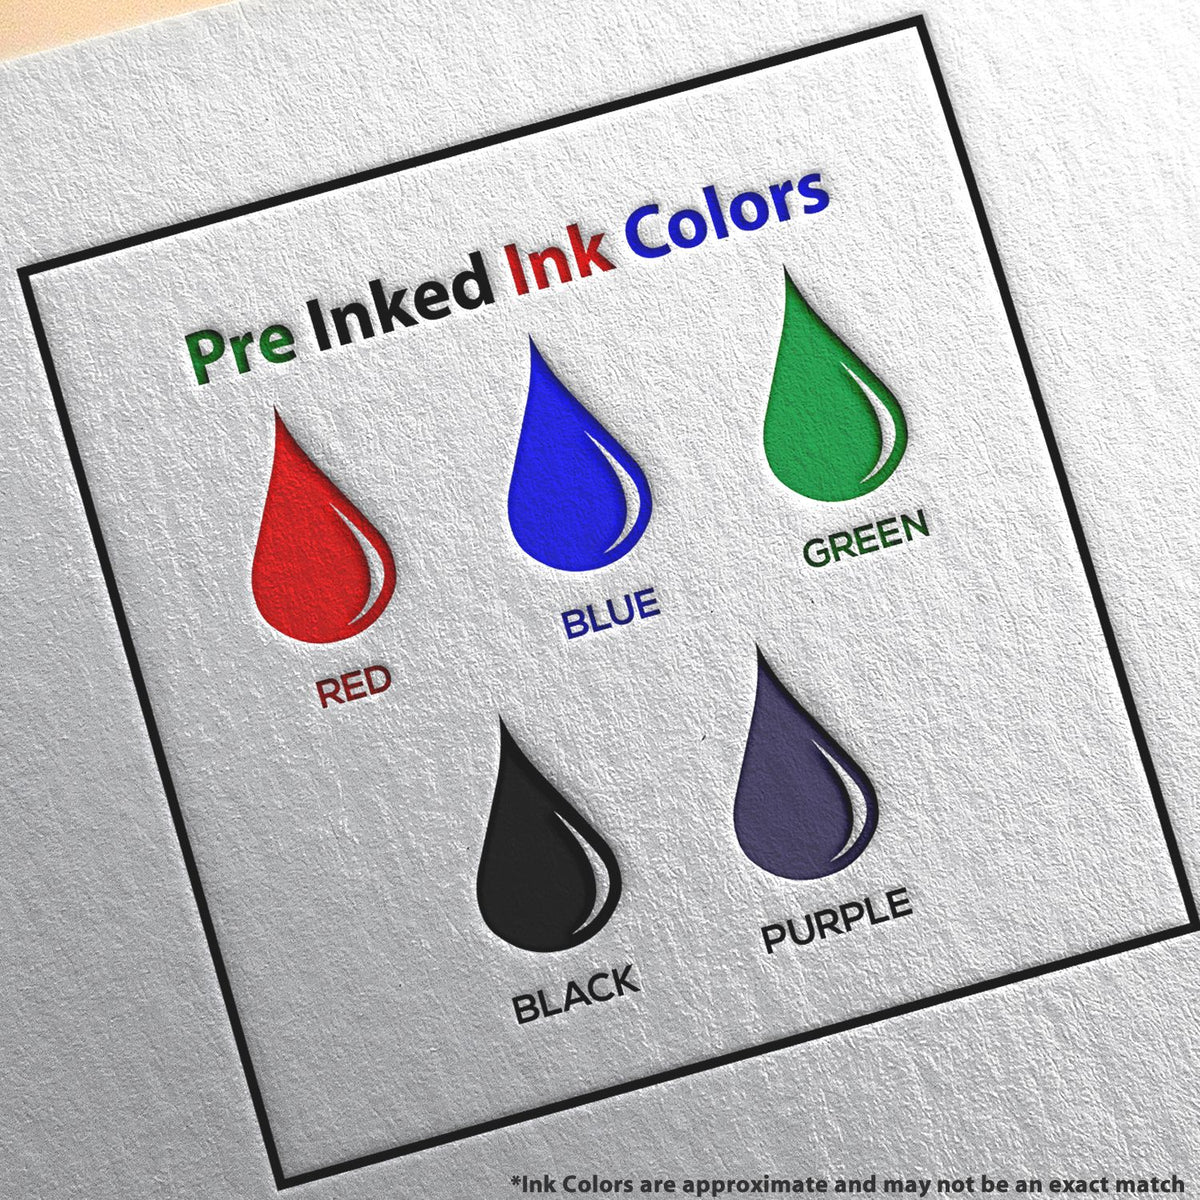 A picture showing the different ink colors or hues available for the Slim Pre-Inked Alaska Land Surveyor Seal Stamp product.